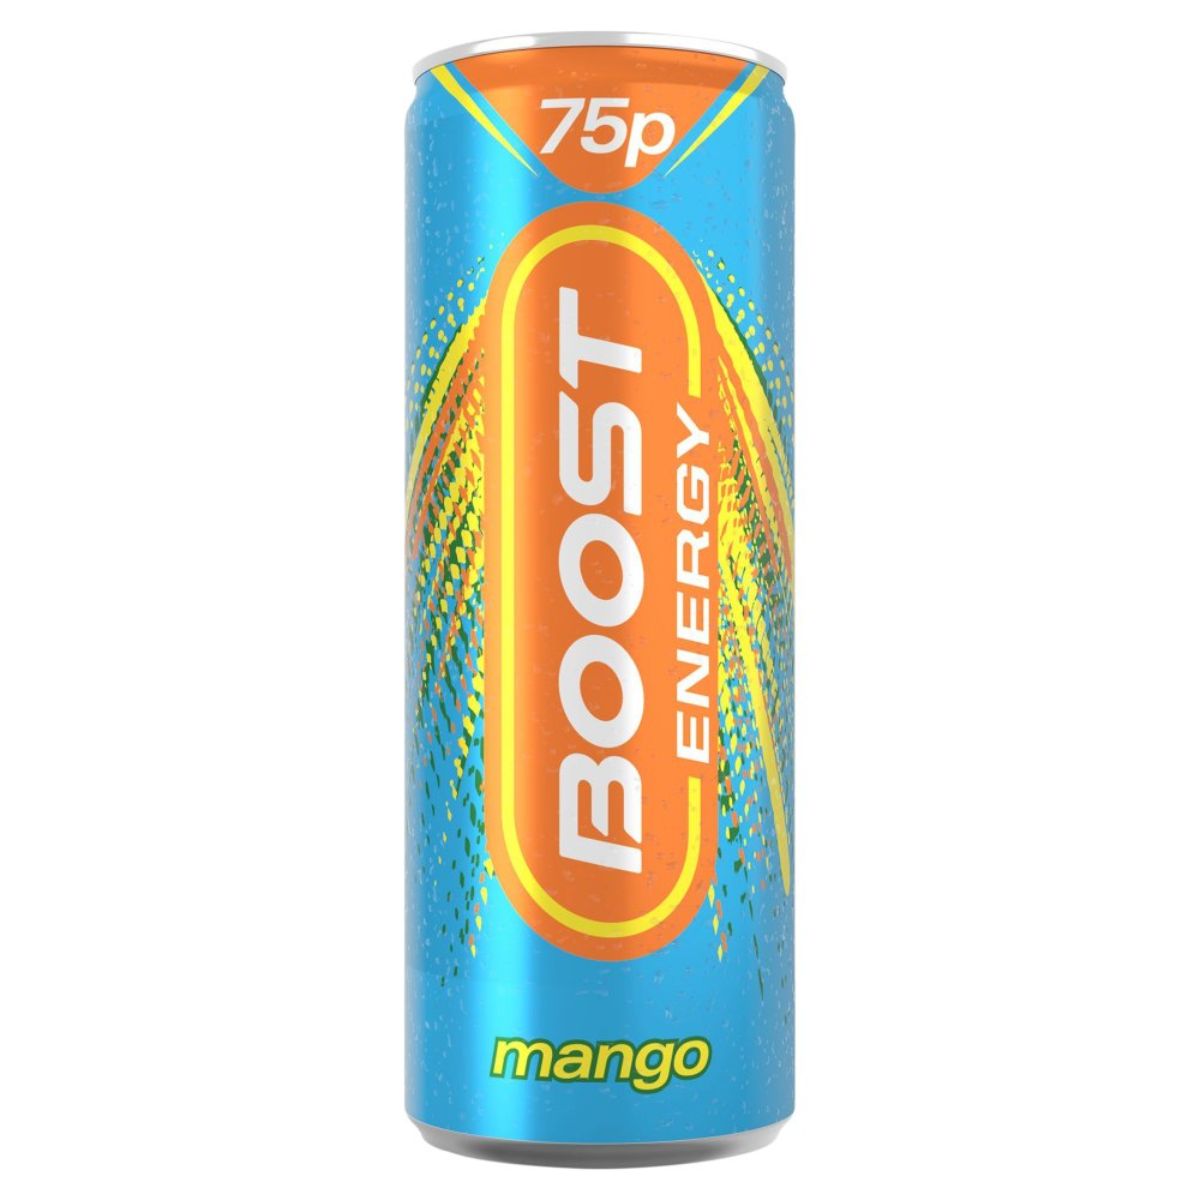 A can of Boost - Mango - 250ml on a white background.